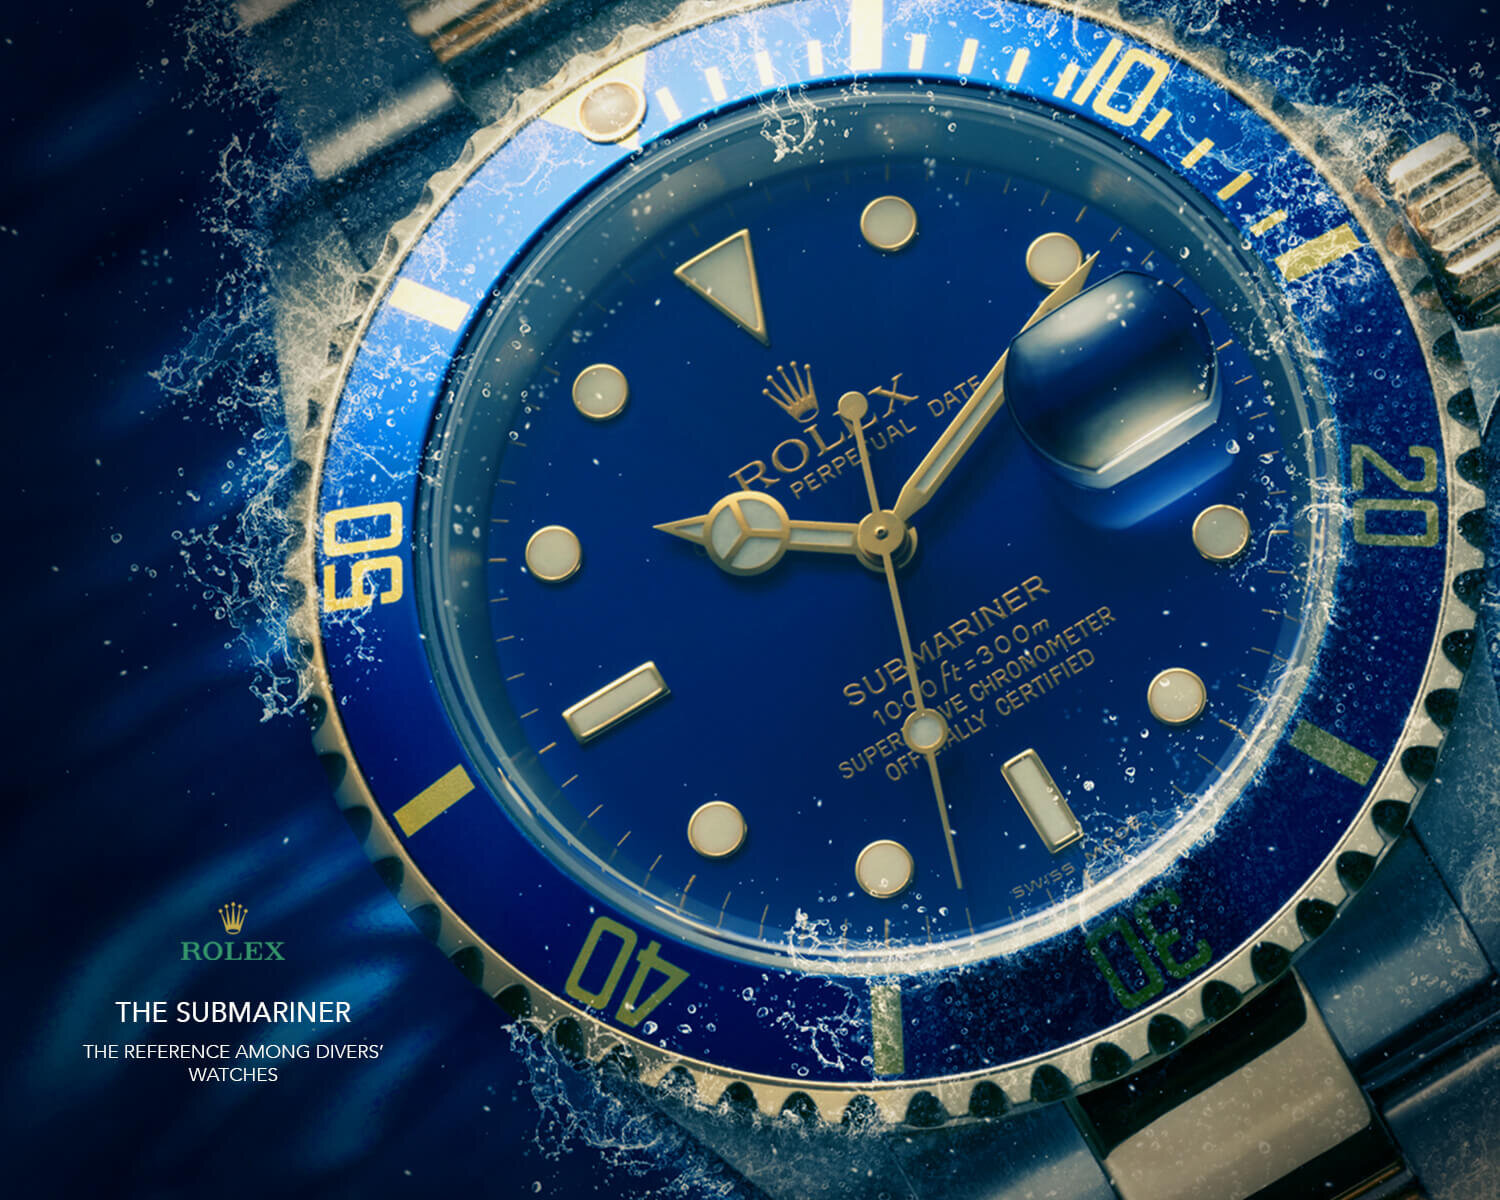 creatieve-commerciele-fotografie-rolex-submariner-high-end-product-photography-watches.jpg